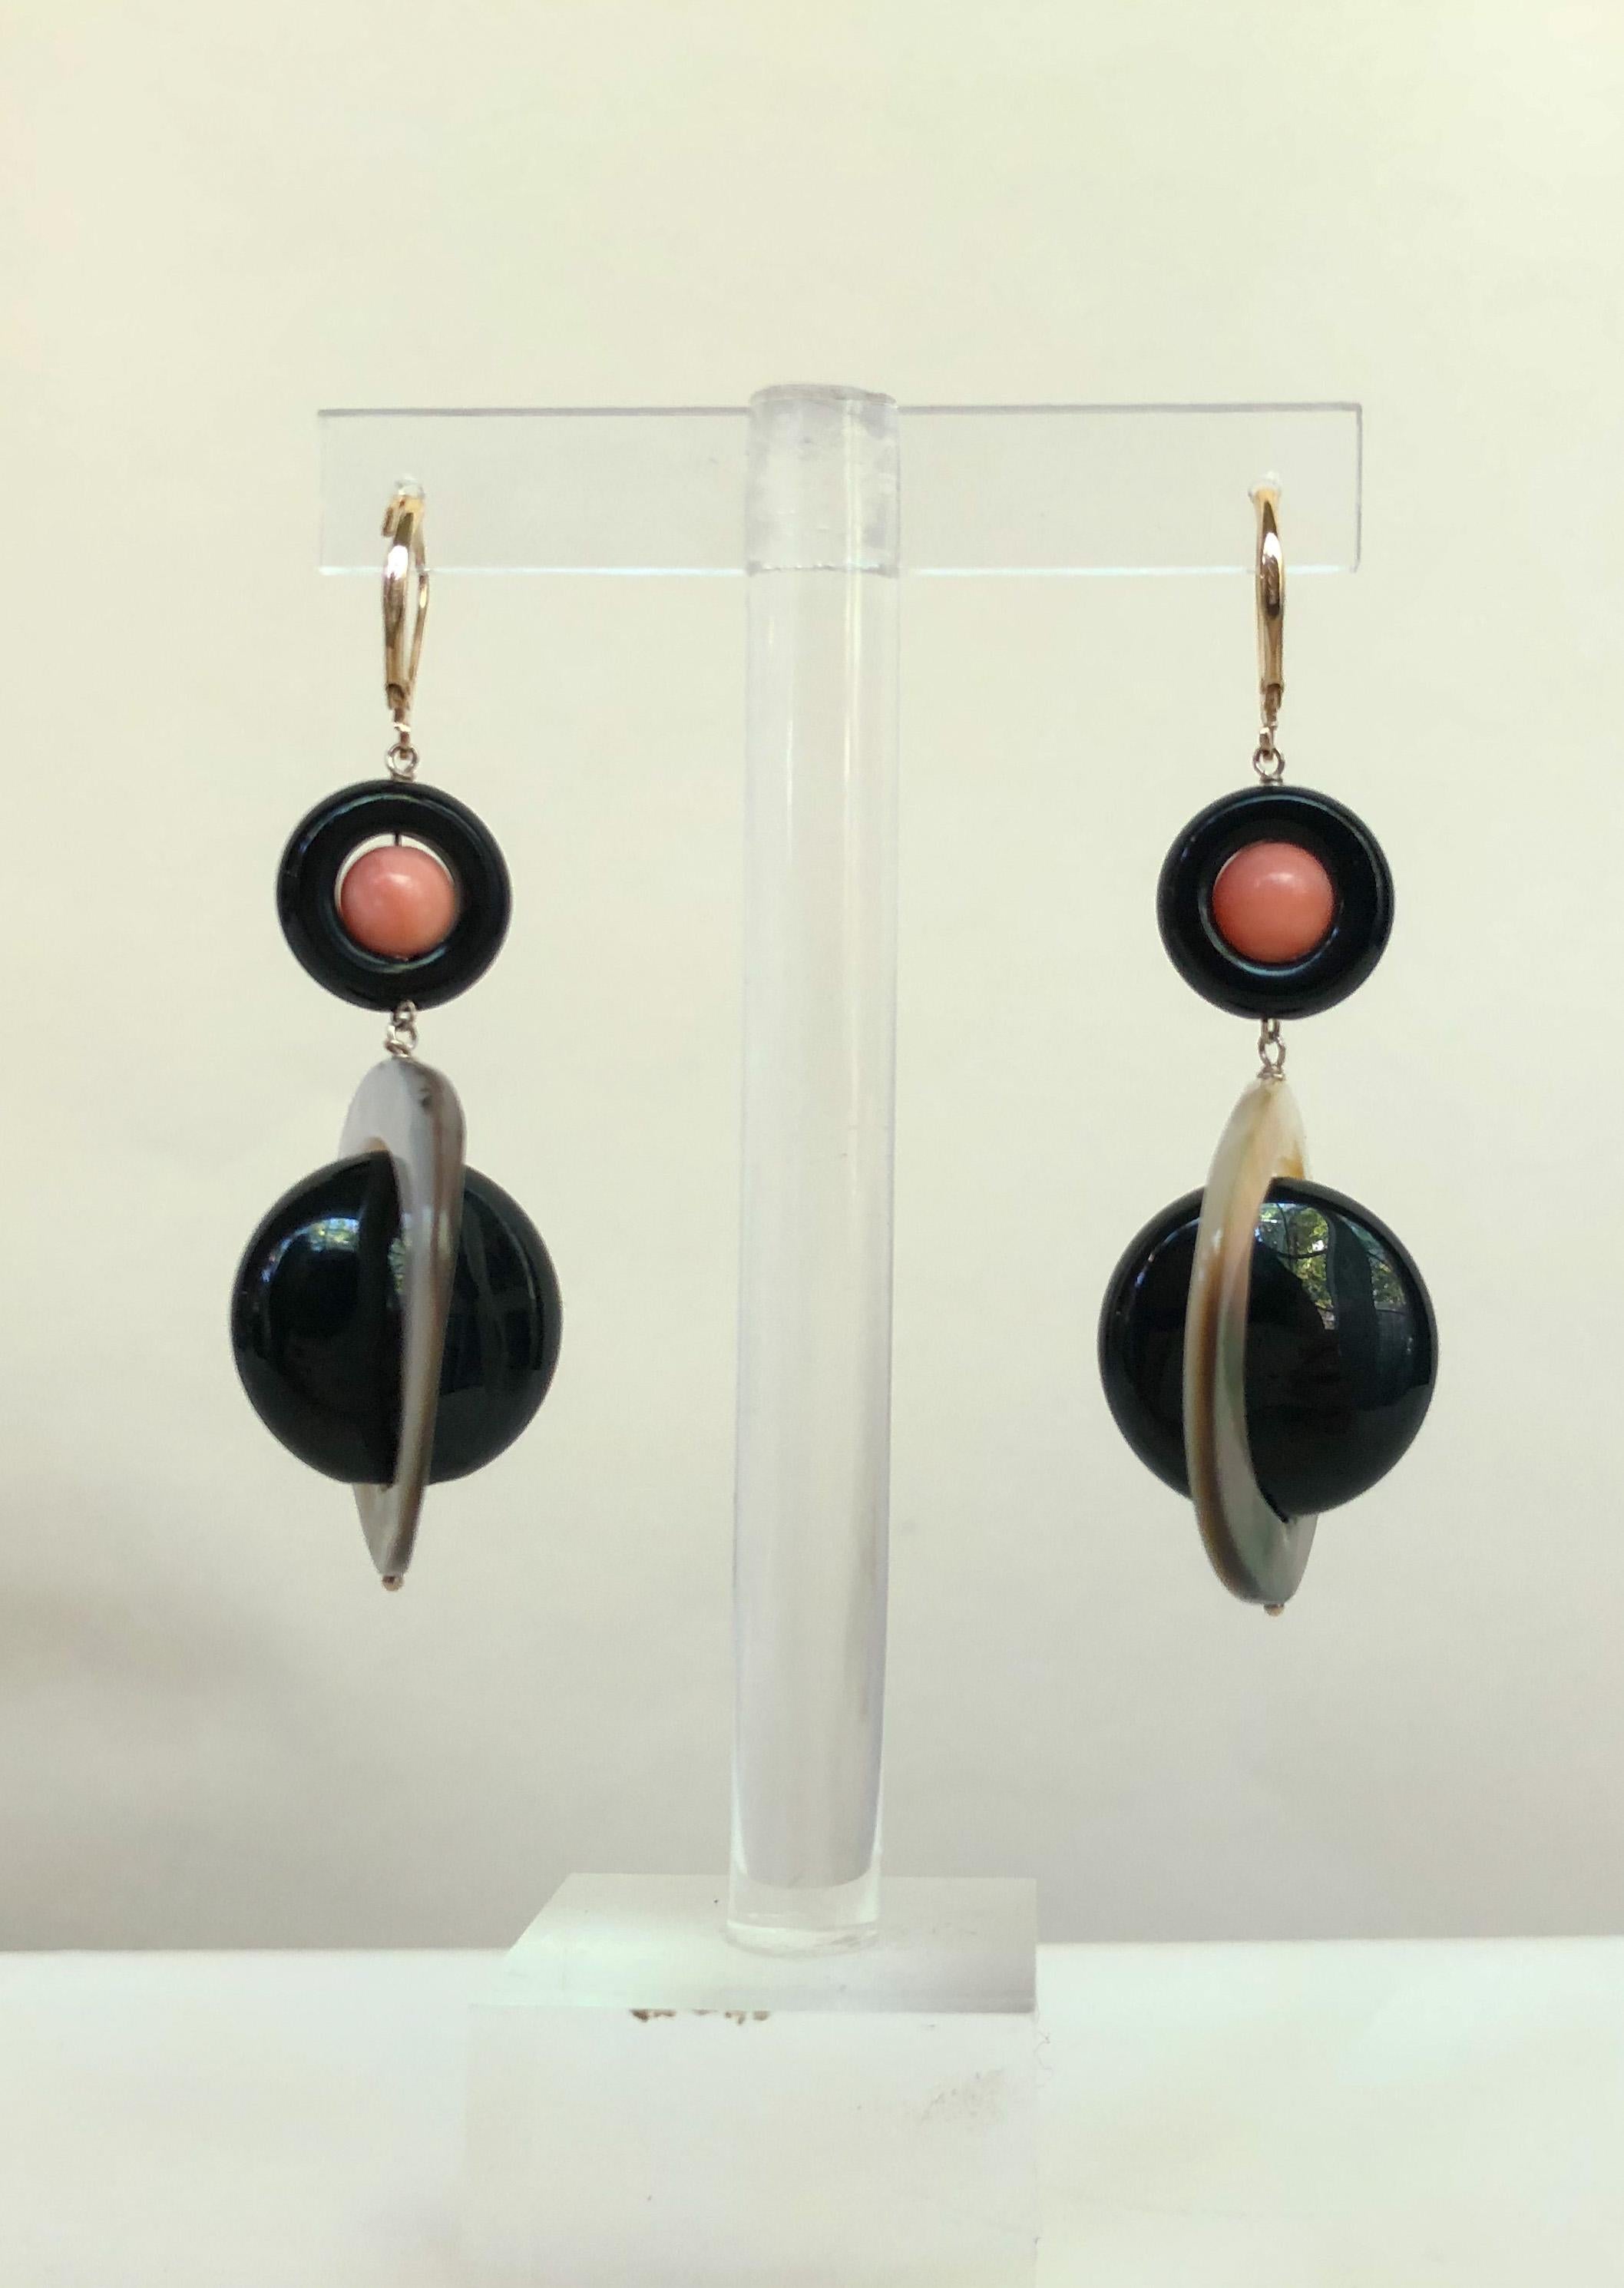 These unique earrings are a bold addition to anyone's jewelry collection. The black onyx provides a striking contrast between the pink coral bead and mother of pearl ring. The earrings are approximately 2 inches long, which allows them to flow and